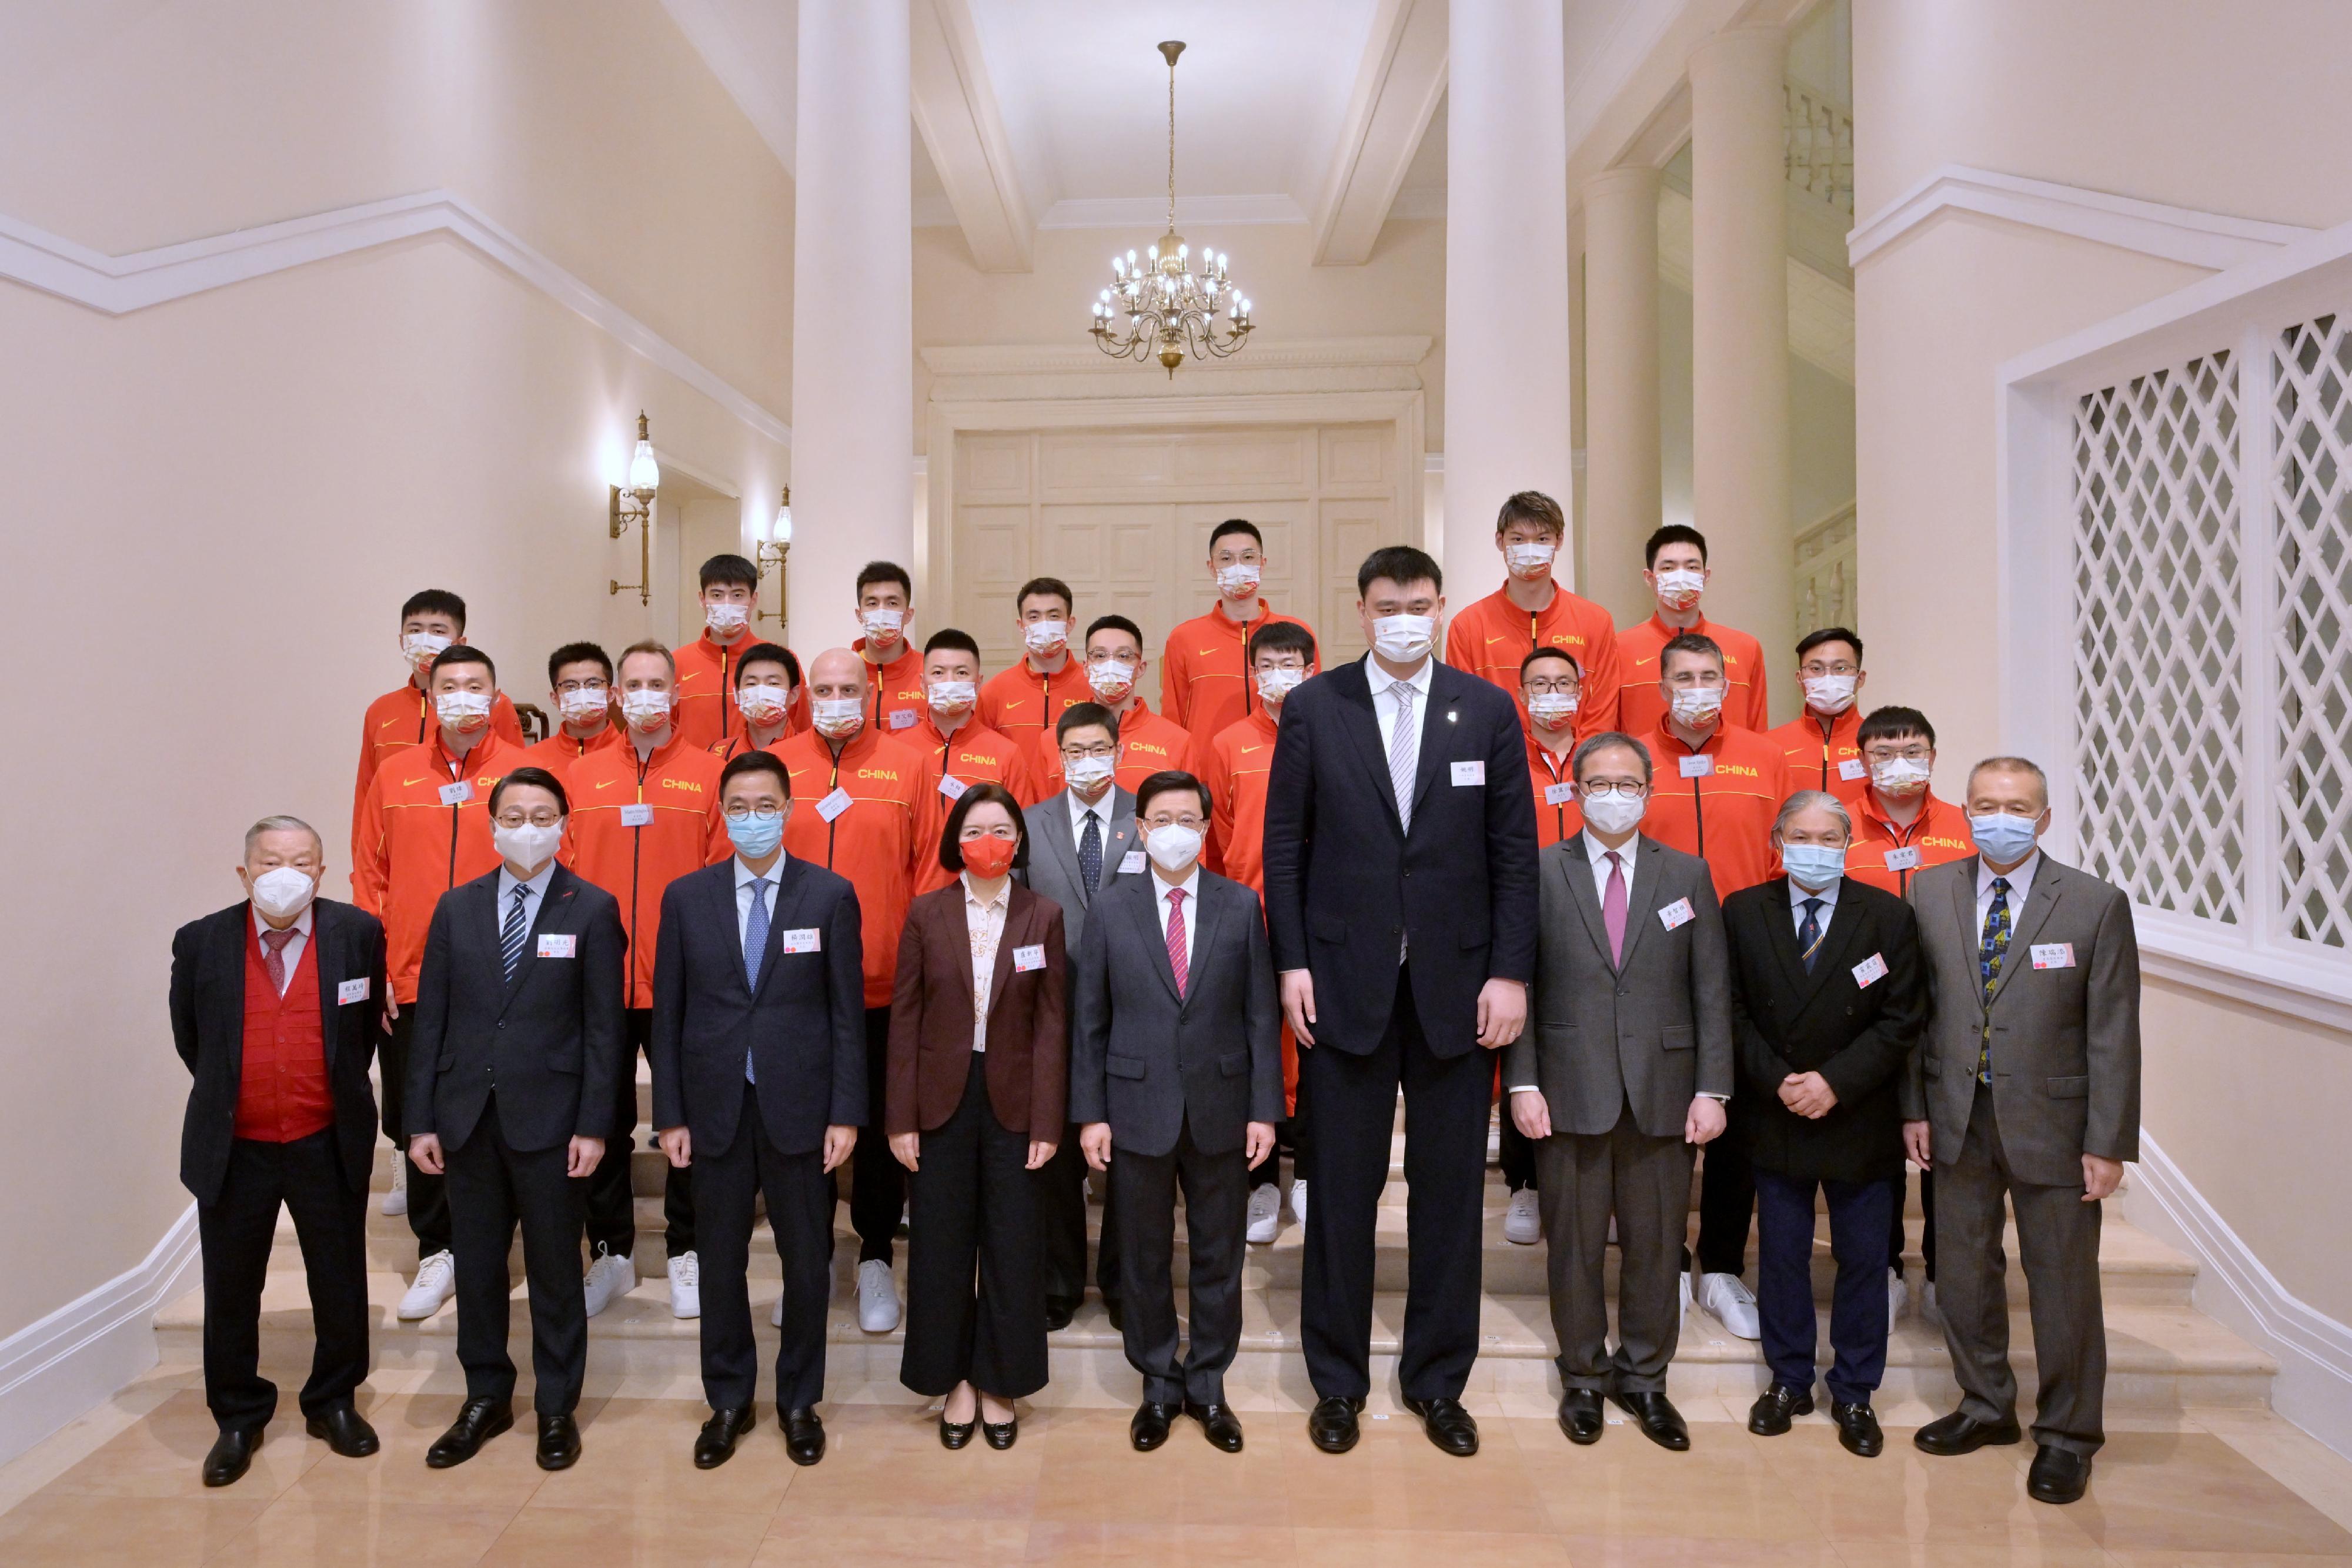 The Chief Executive, Mr John Lee, today (February 26) hosted a dinner at Government House in welcoming the national men's basketball team playing home matches in Hong Kong. Photo shows Mr Lee (front row, centre); Deputy Director of the Liaison Office of the Central People's Government in the Hong Kong Special Administrative Region Ms Lu Xinning (front row, fourth left); the President of the China Basketball Association and the Manager of Team China, Mr Yao Ming (front row, fourth right); the Secretary for Culture, Sports and Tourism, Mr Kevin Yeung (front row, third left); the Permanent Secretary for Culture, Sports and Tourism, Mr Joe Wong (front row, third right); the Director of Leisure and Cultural Services, Mr Vincent Liu (front row, second left); and other guests.